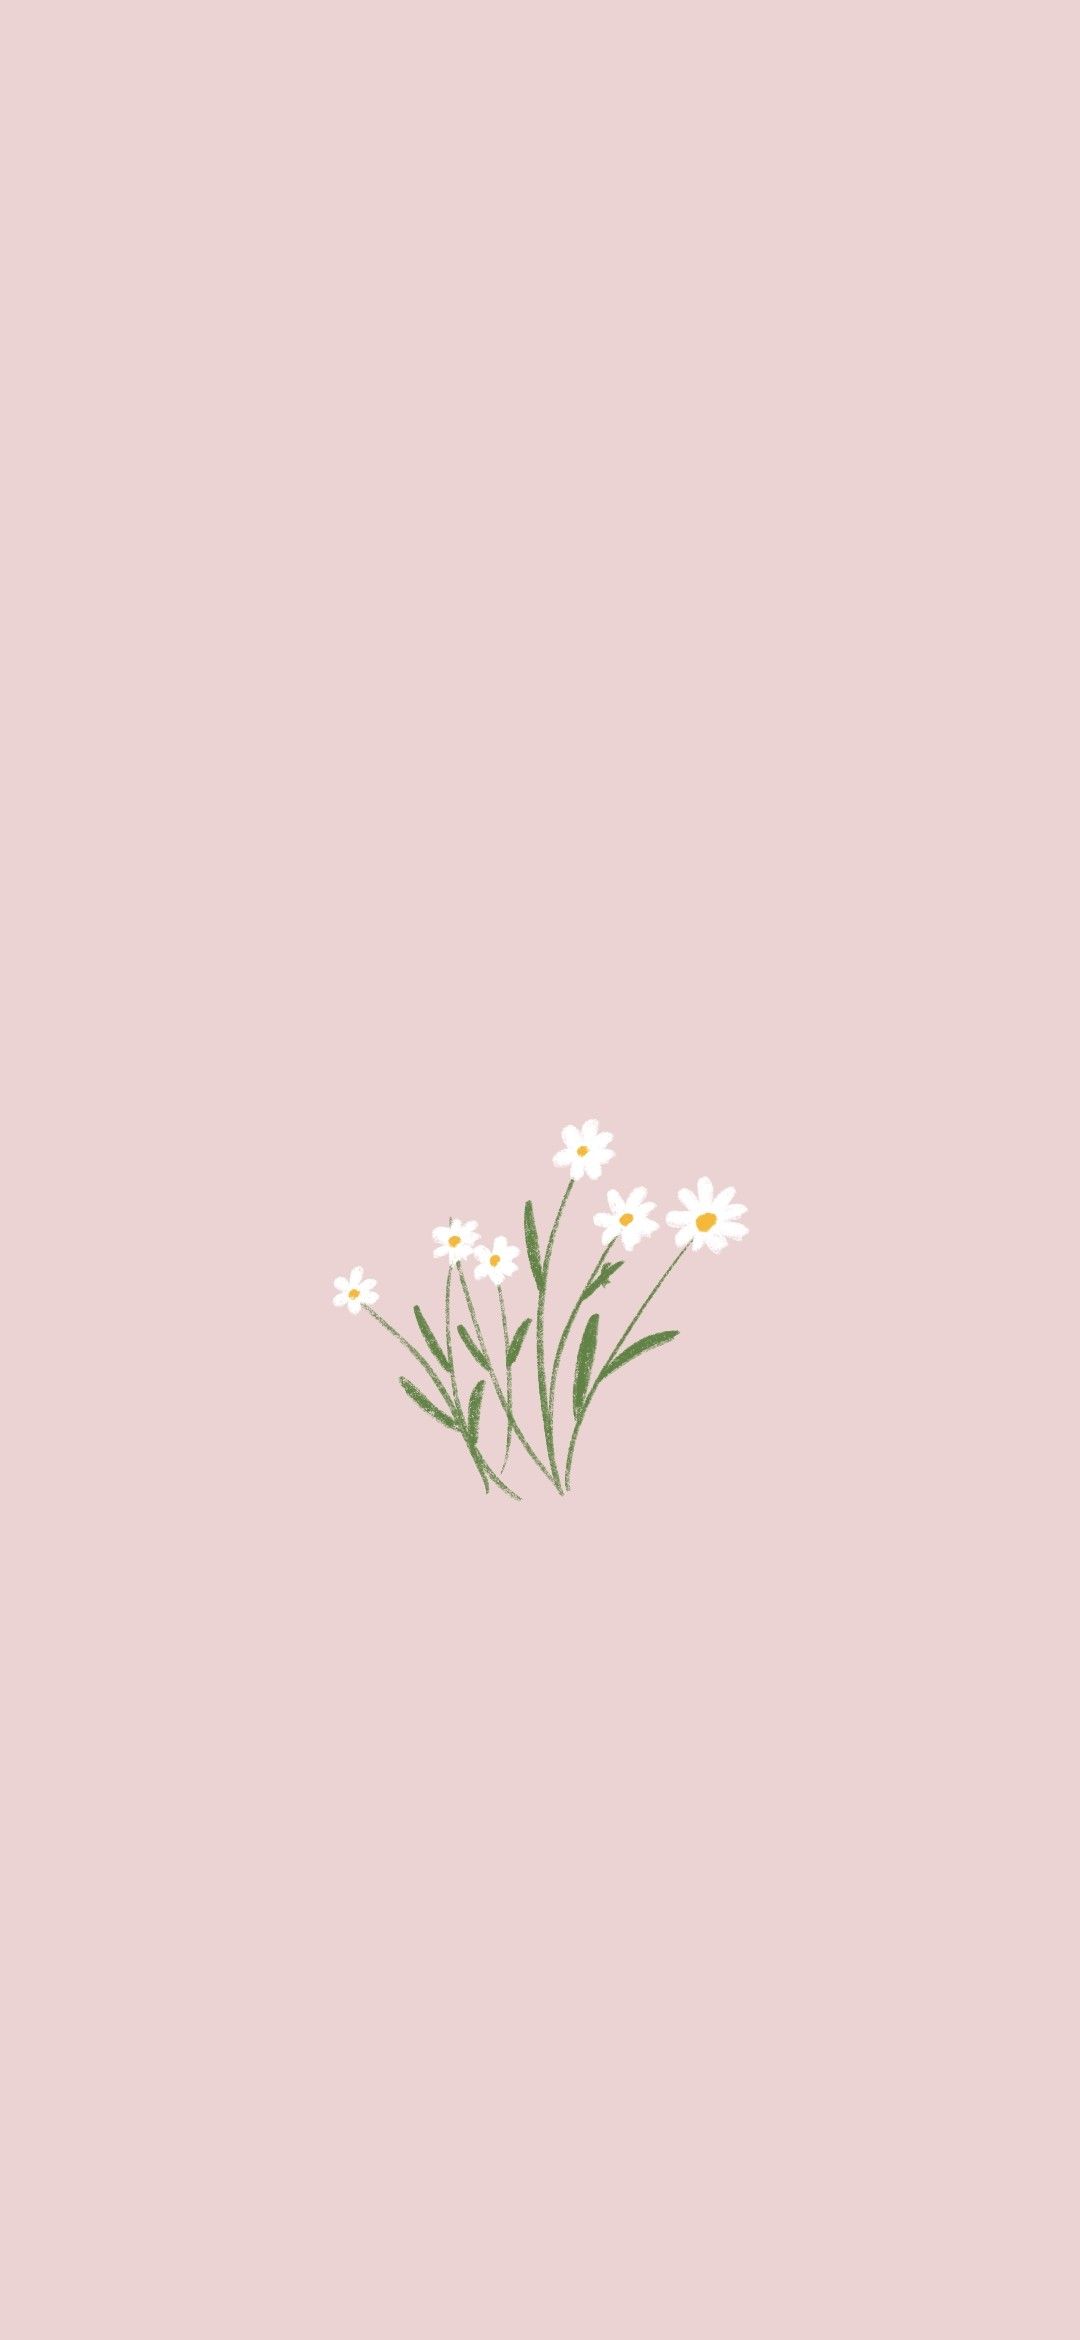 Customize 224 Spring Aesthetic Phone Wallpaper Templates Online  Canva